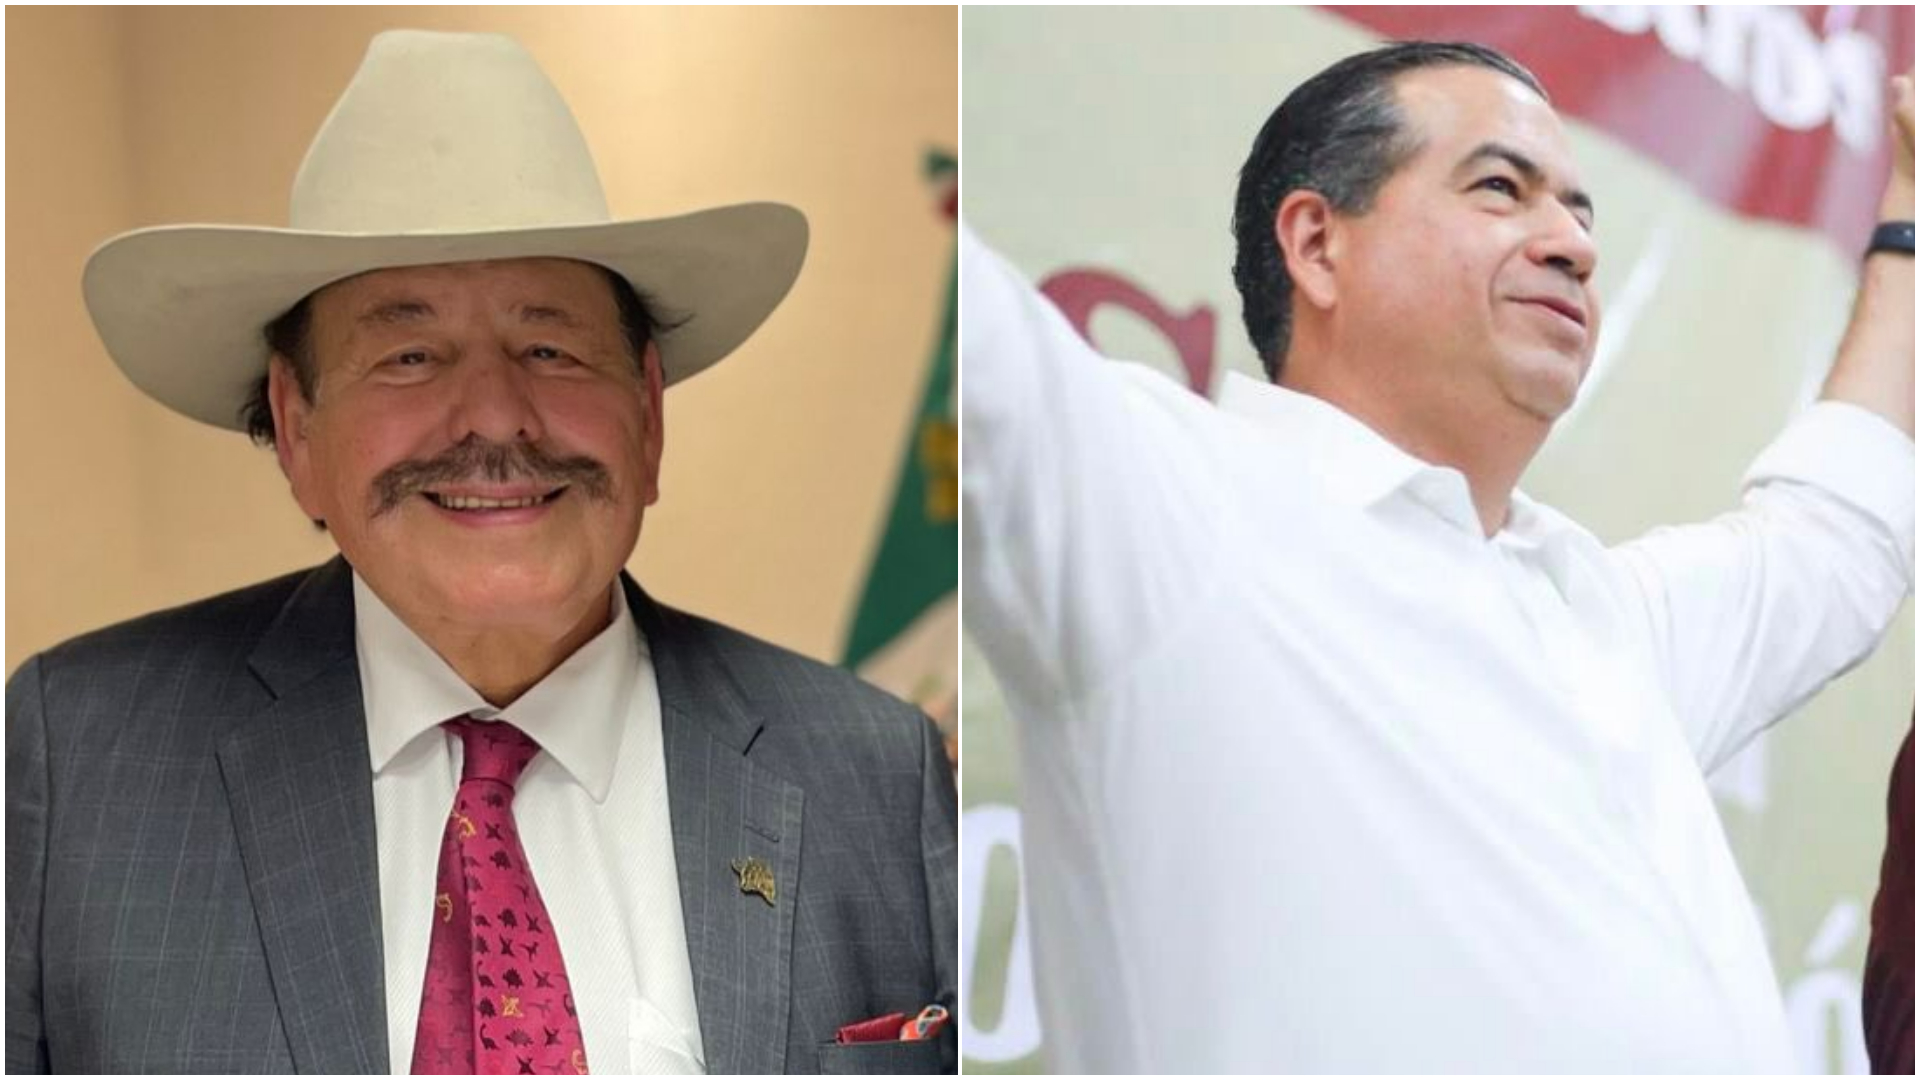 The appointment of the official candidate of Coahuila in Morena continues to cause disputes (Twitter/@aguadiana/@RicardoMeb)